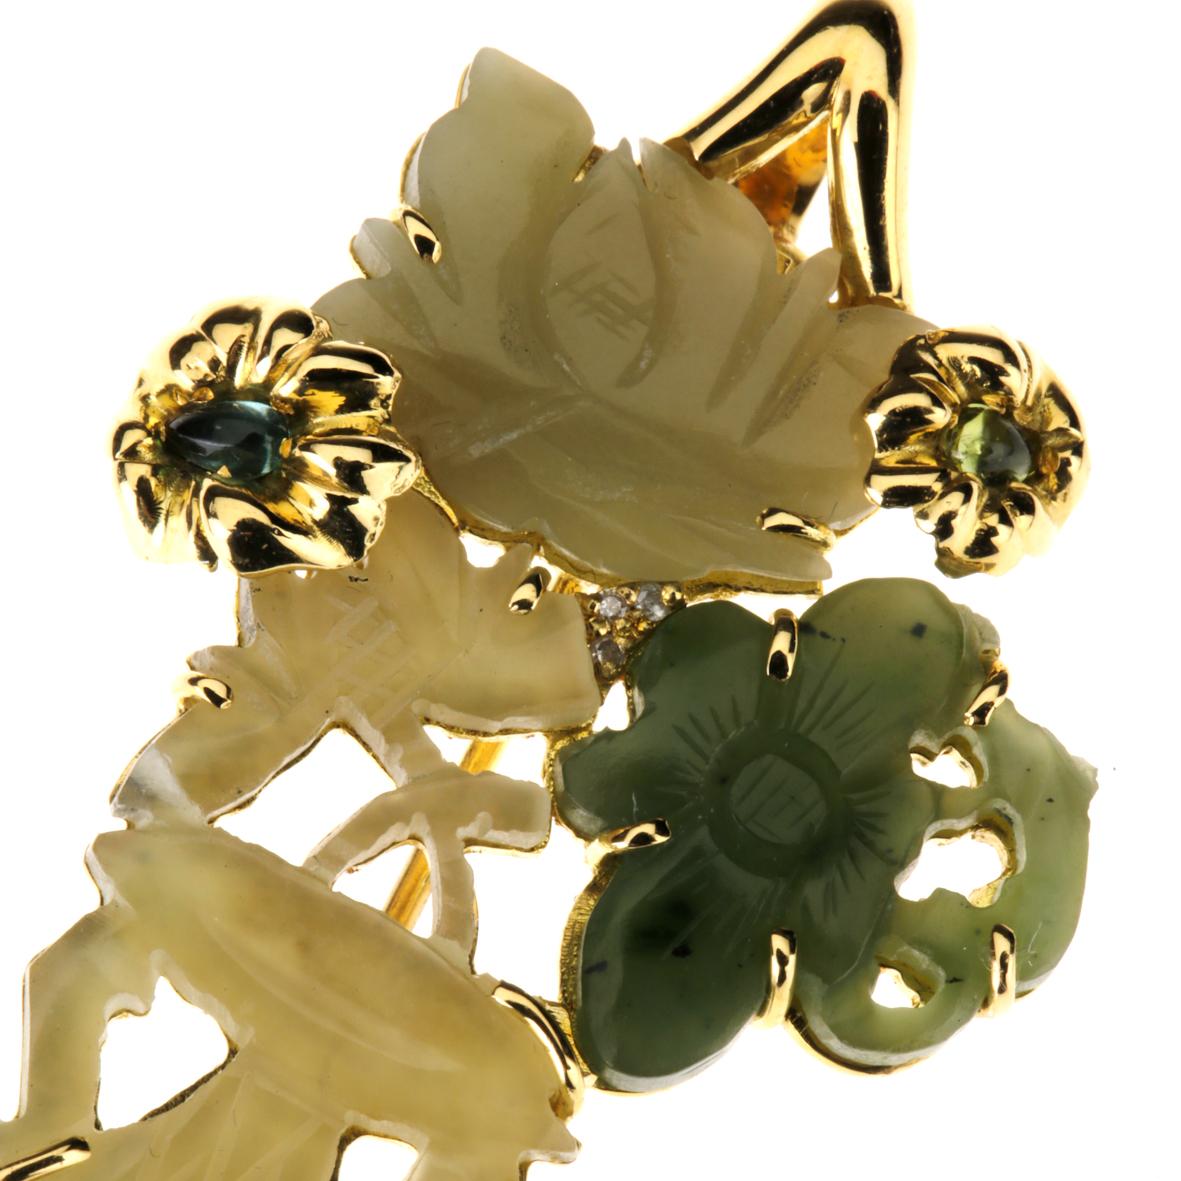 Unique pin and pendant make with antique Chinese jade,  represent a vase of peonie , 18 kt gold 18,35 gr very refine with 2 tourmaline cabochon. All made by hand in Italy. 8 cm total length.
All Giulia Colussi jewelry is new and has never been